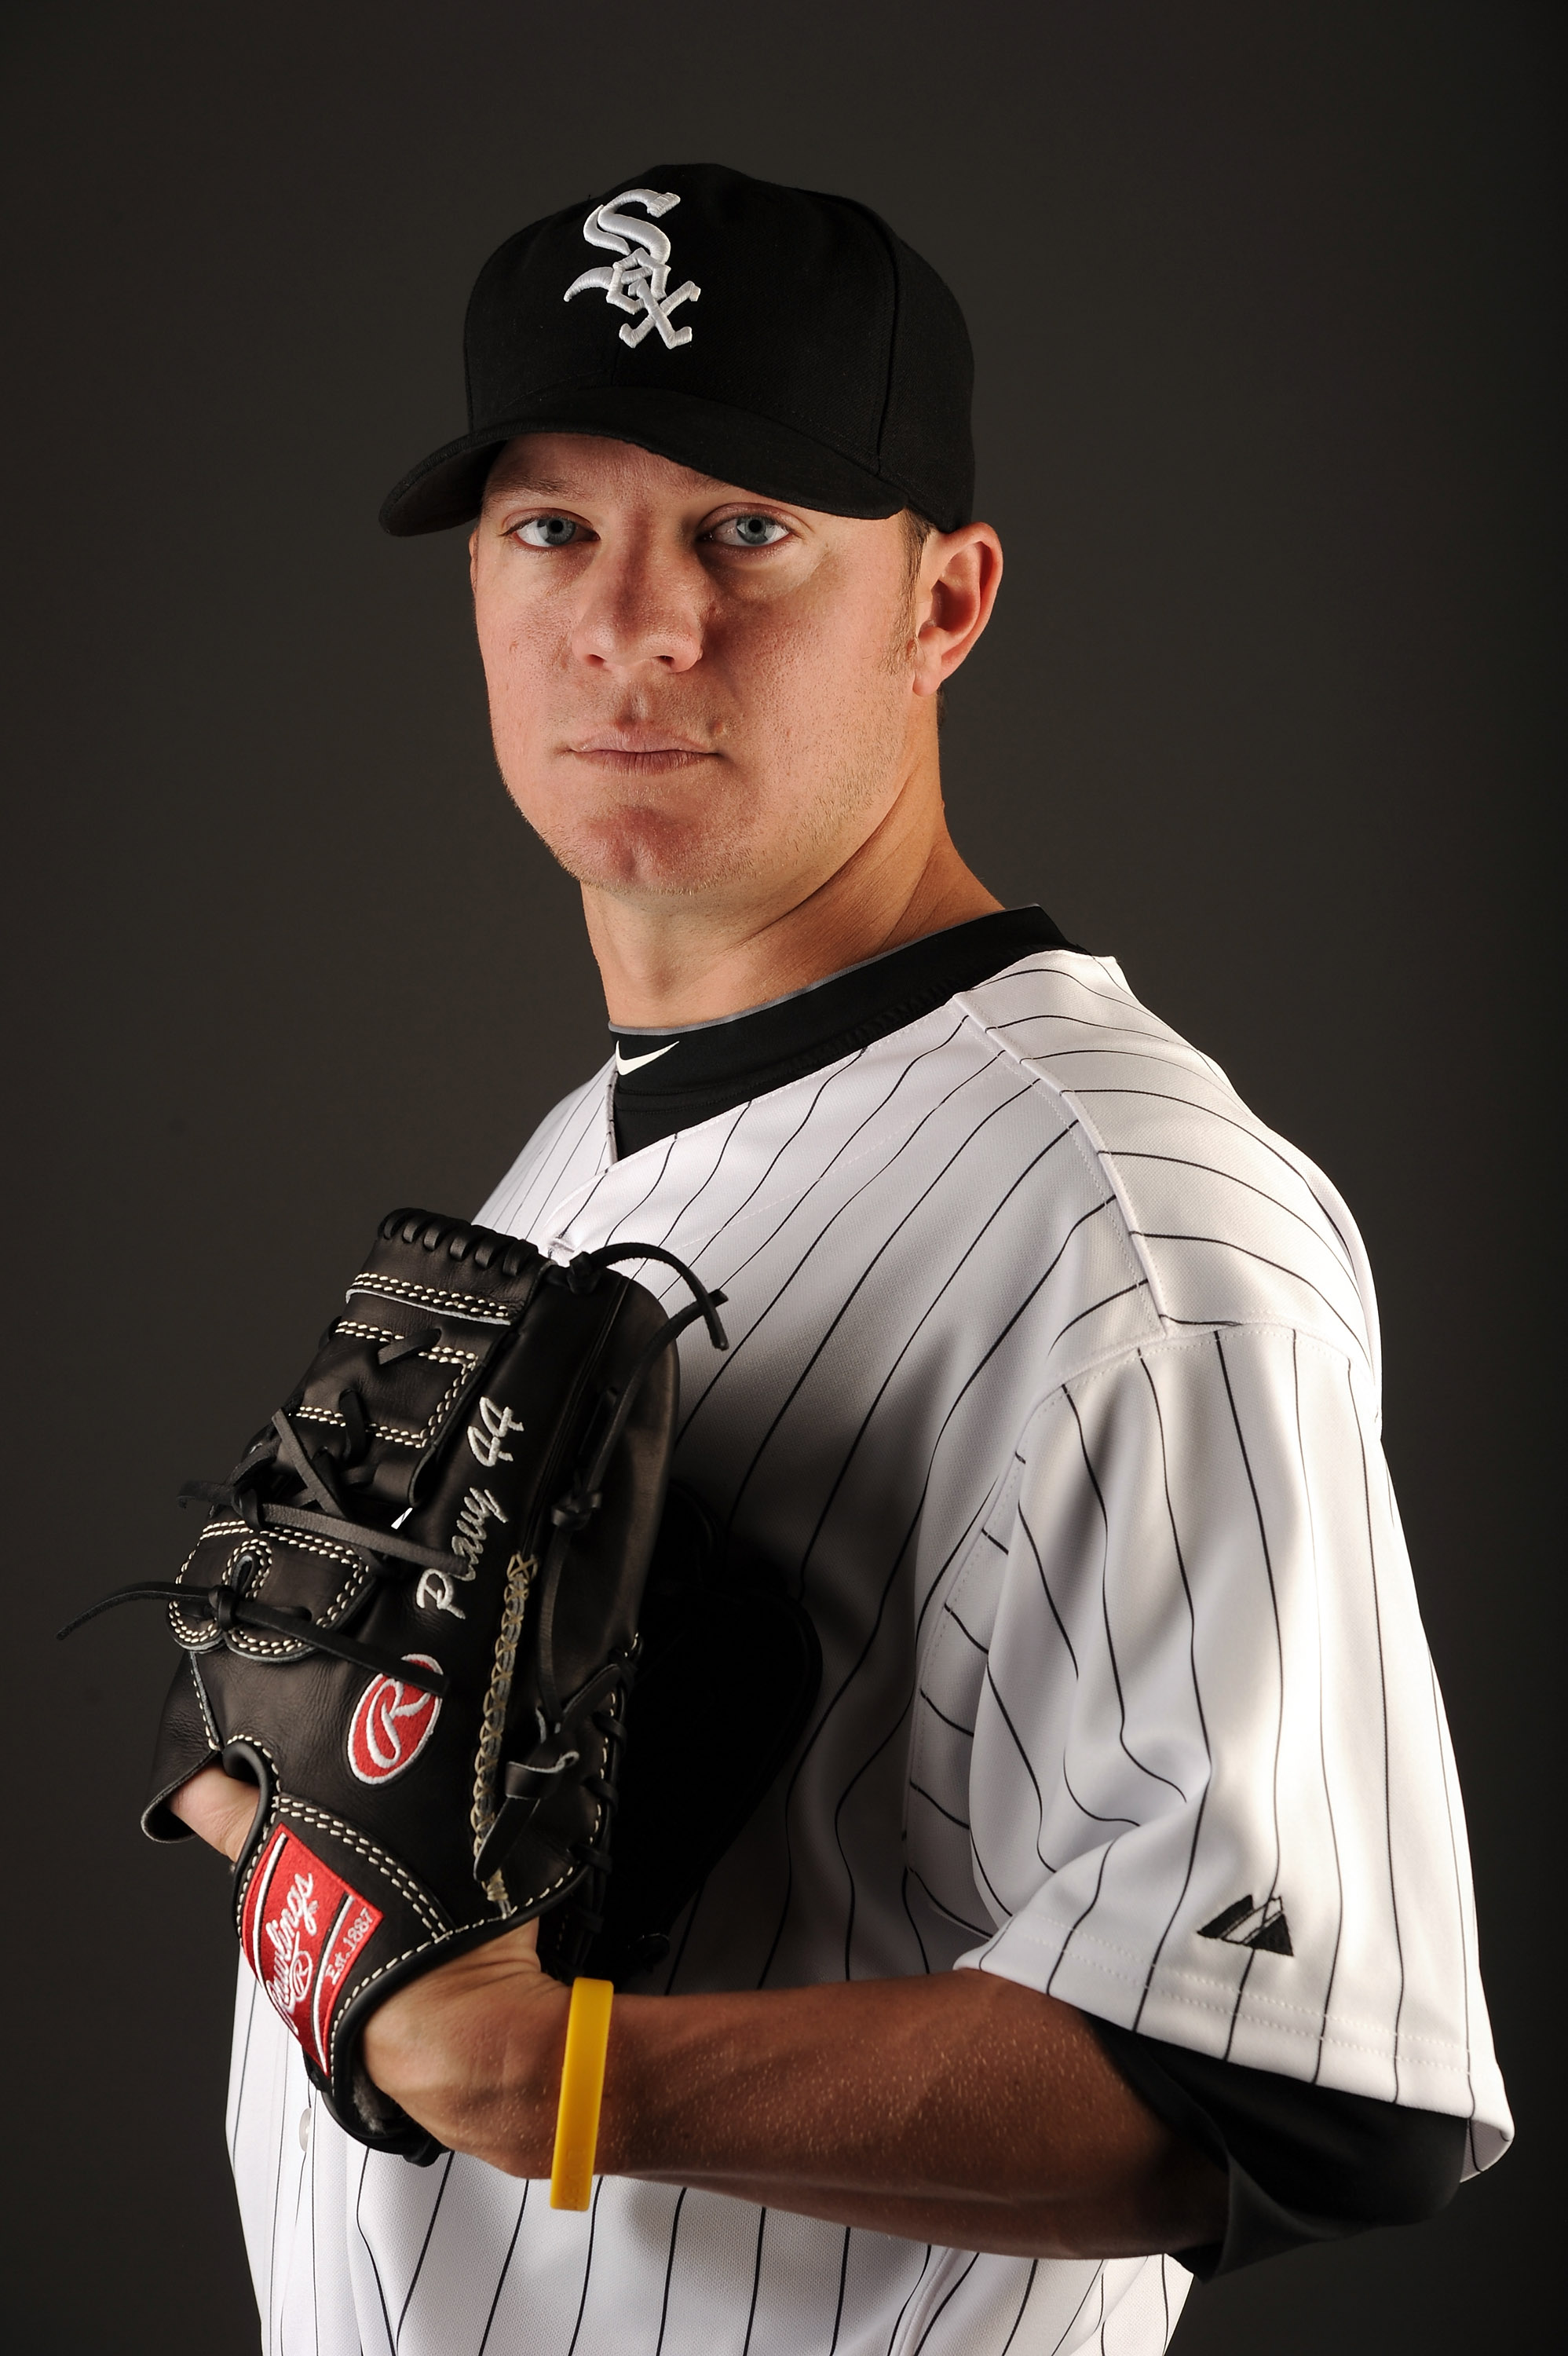 White Sox Pitcher Jake Peavy Honors a Longtime Friend and